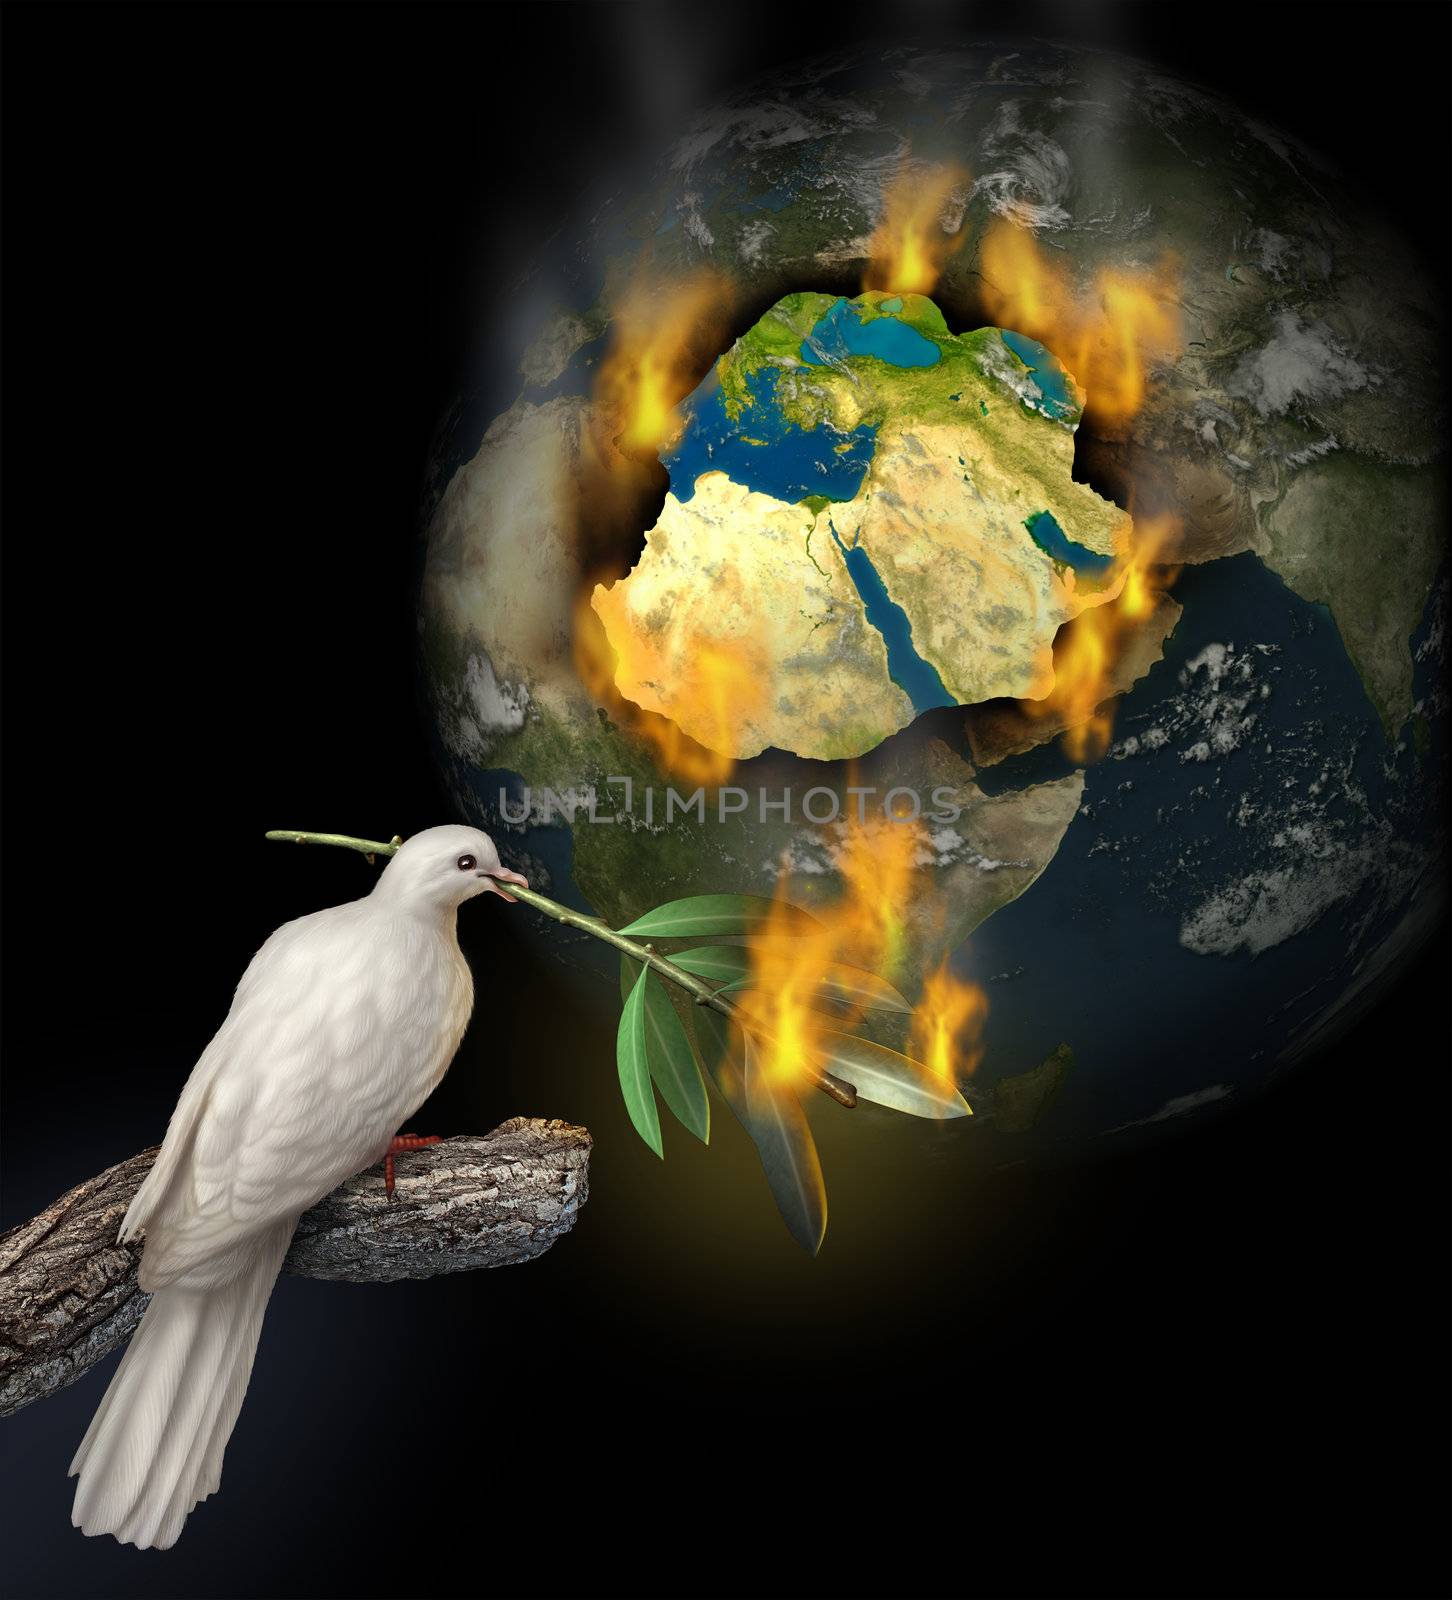 Middle East conflict as a burning map of Egypt Syria Iran Israel Saudi Arabia Libya Yemen Iraq with a white dove holding a burning olive branch for the tragedy of war and political problems.